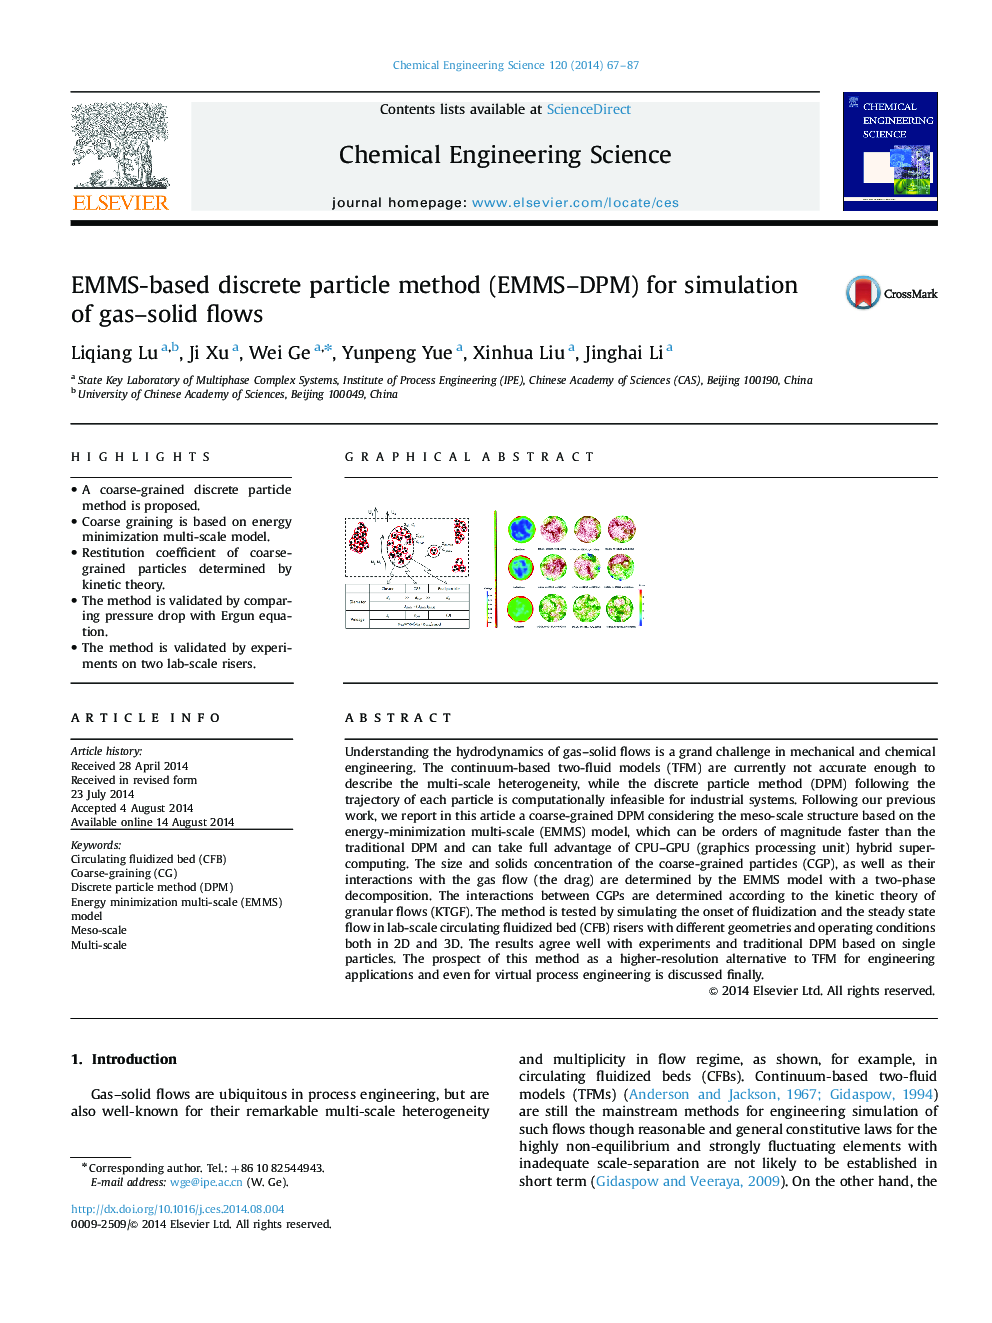 EMMS-based discrete particle method (EMMS-DPM) for simulation of gas-solid flows